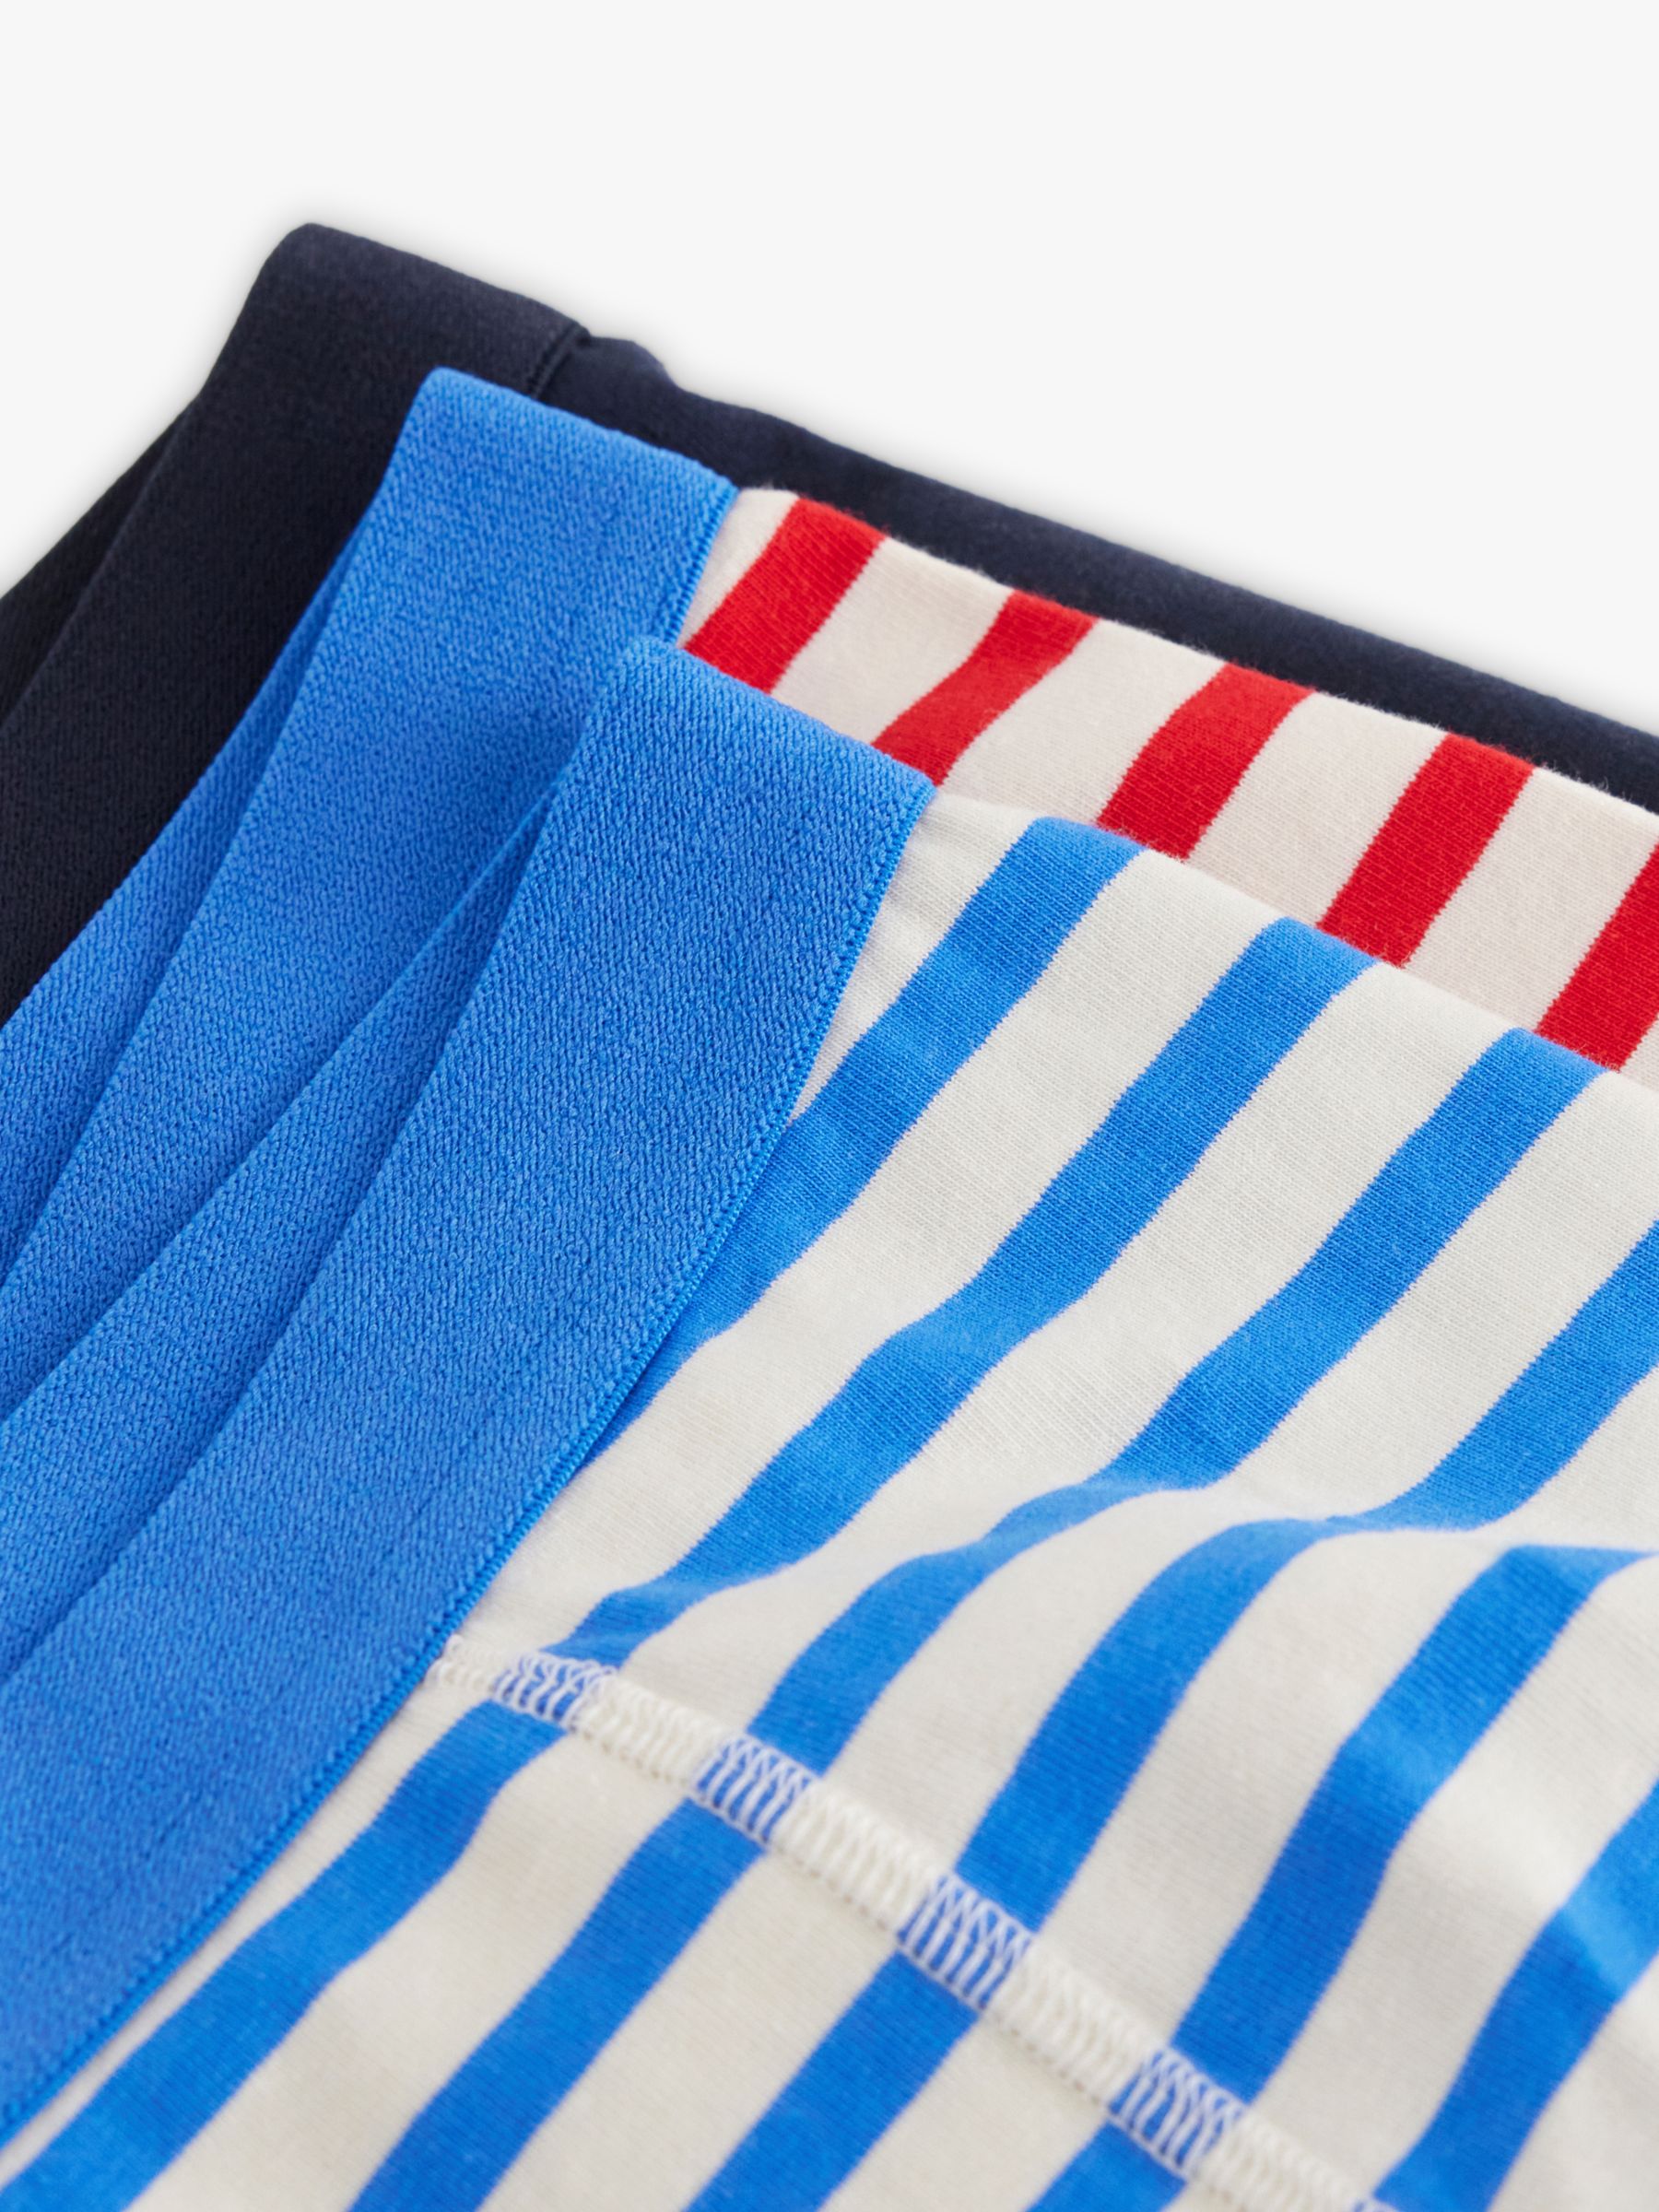 Lindex Kids' Striped Boxers, Pack of 3, Red/Blue/White, 6-8 years